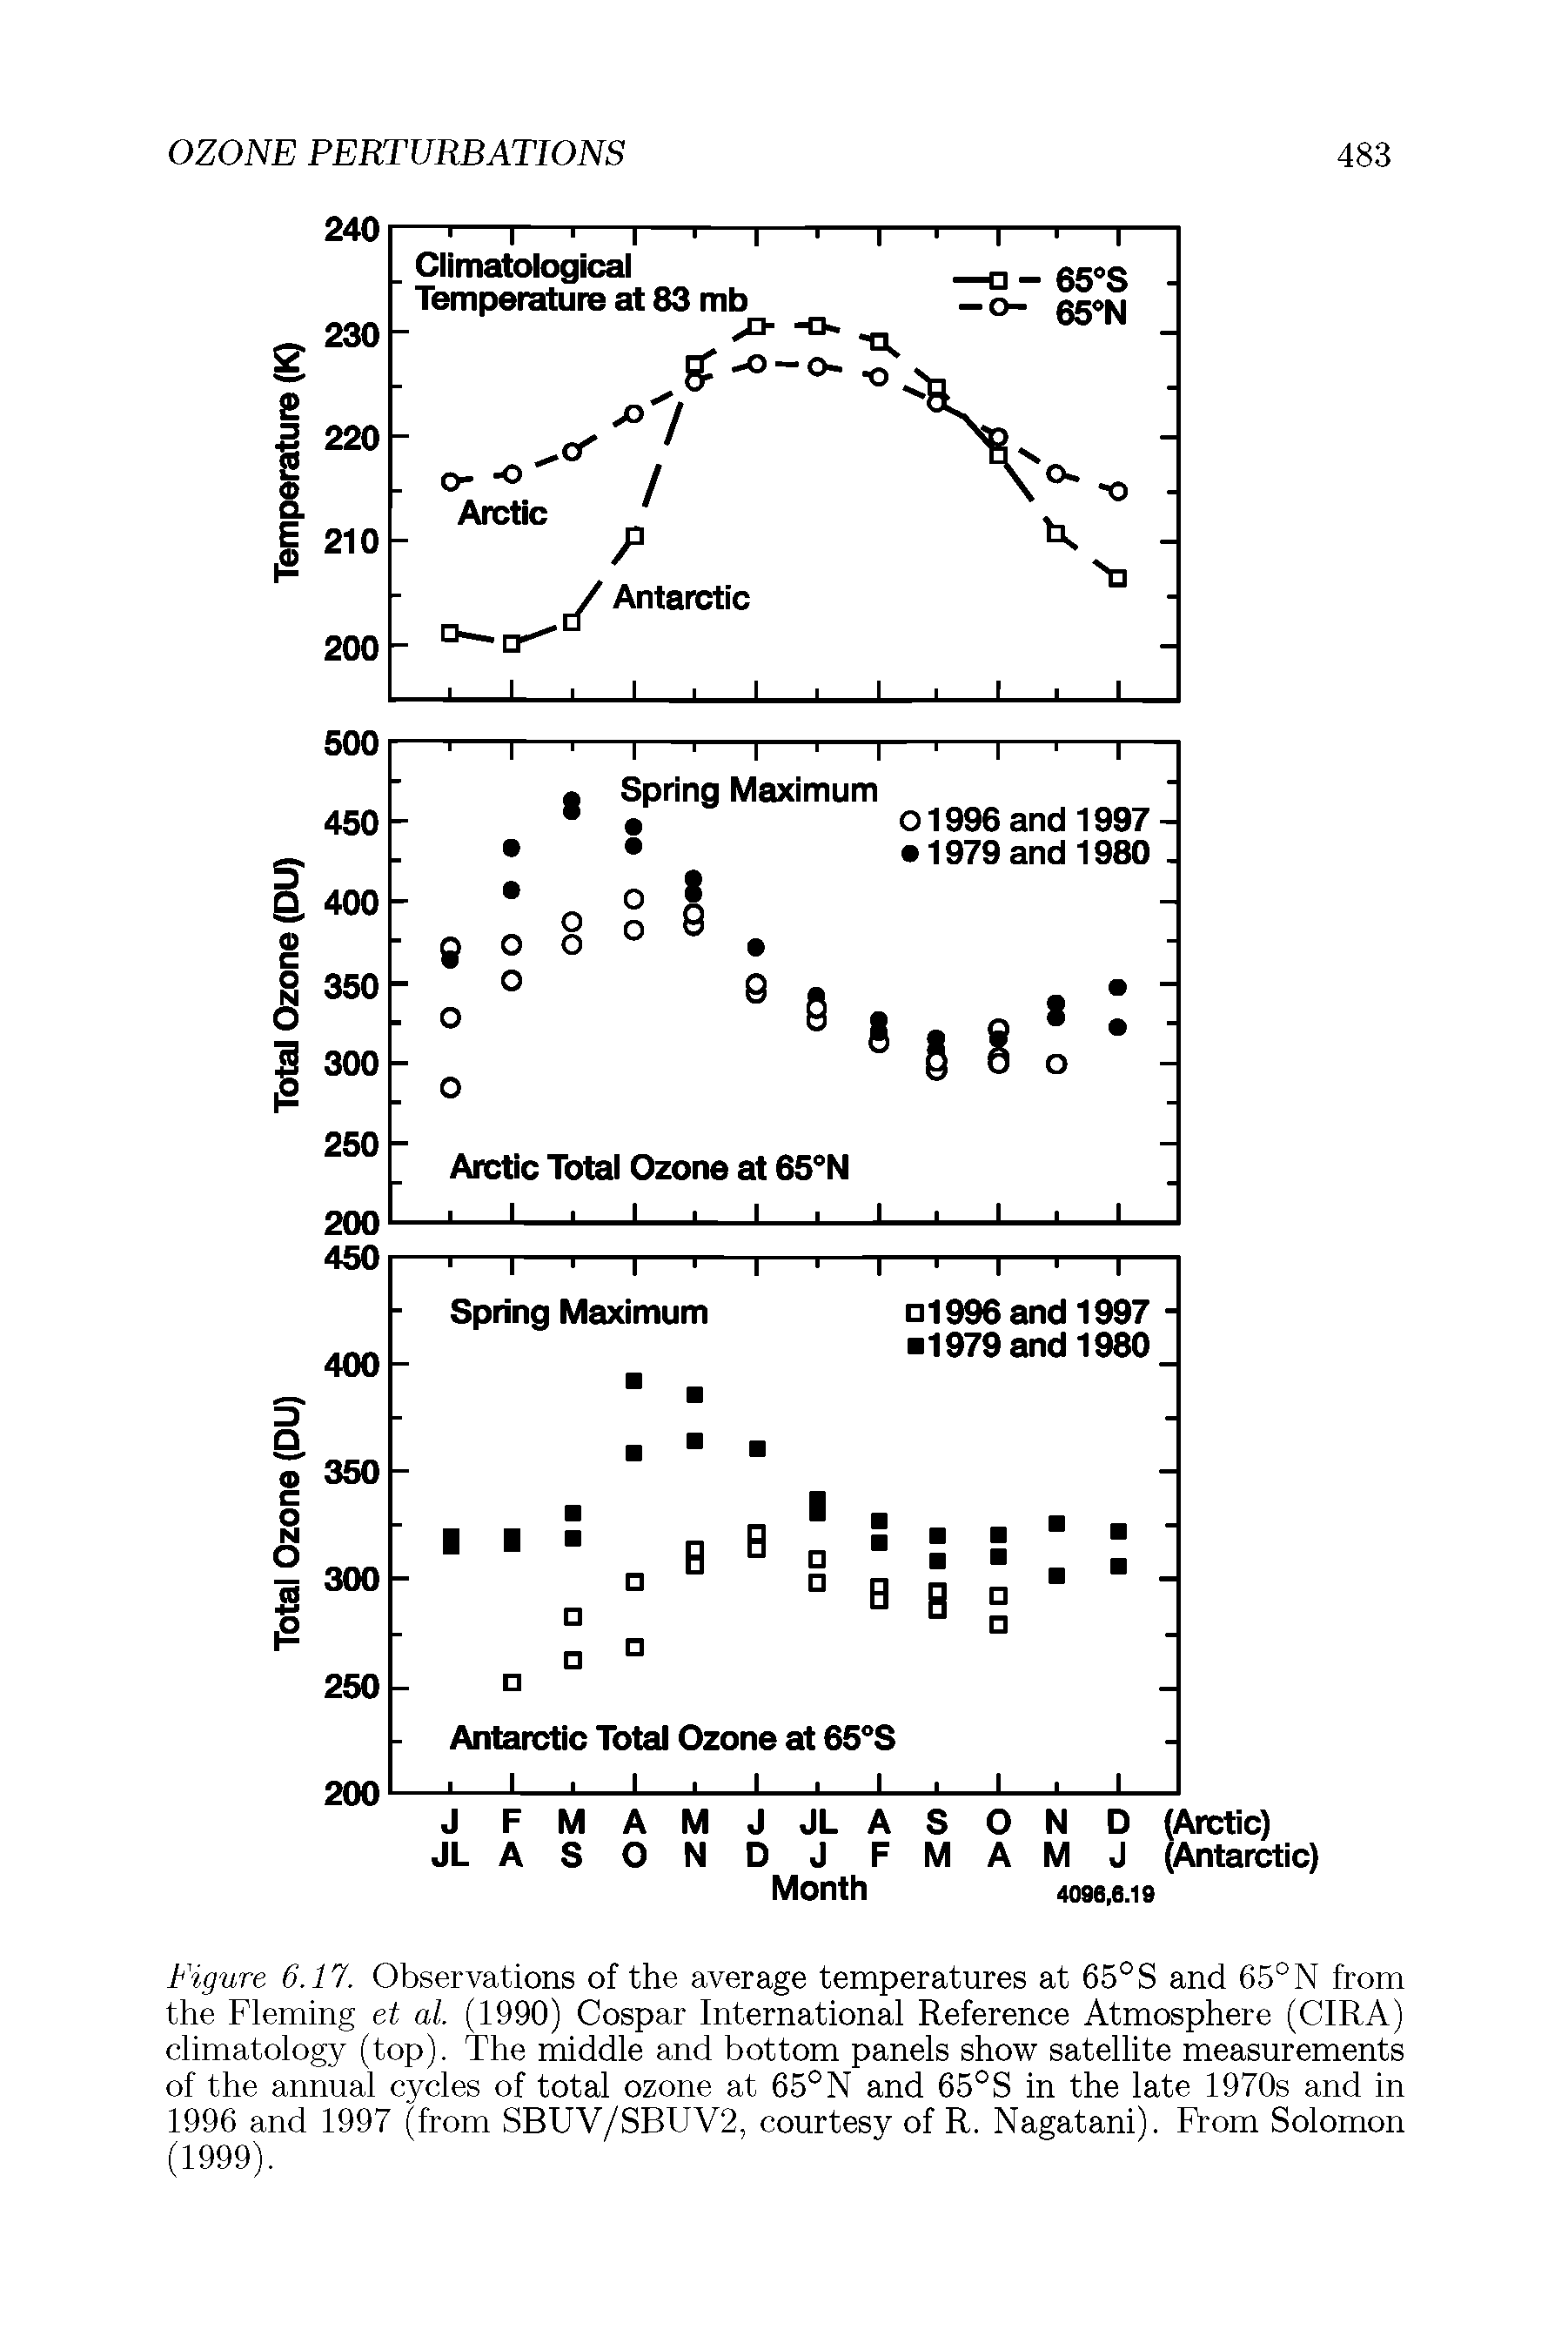 Figure 6.17. Observations of the average temperatures at 65° S and 65° N from the Fleming et al. (1990) Cospar International Reference Atmosphere (CIRA) climatology (top). The middle and bottom panels show satellite measurements of the annual cycles of total ozone at 65°N and 65°S in the late 1970s and in 1996 and 1997 (from SBUV/SBUV2, courtesy of R. Nagatani). From Solomon (1999).